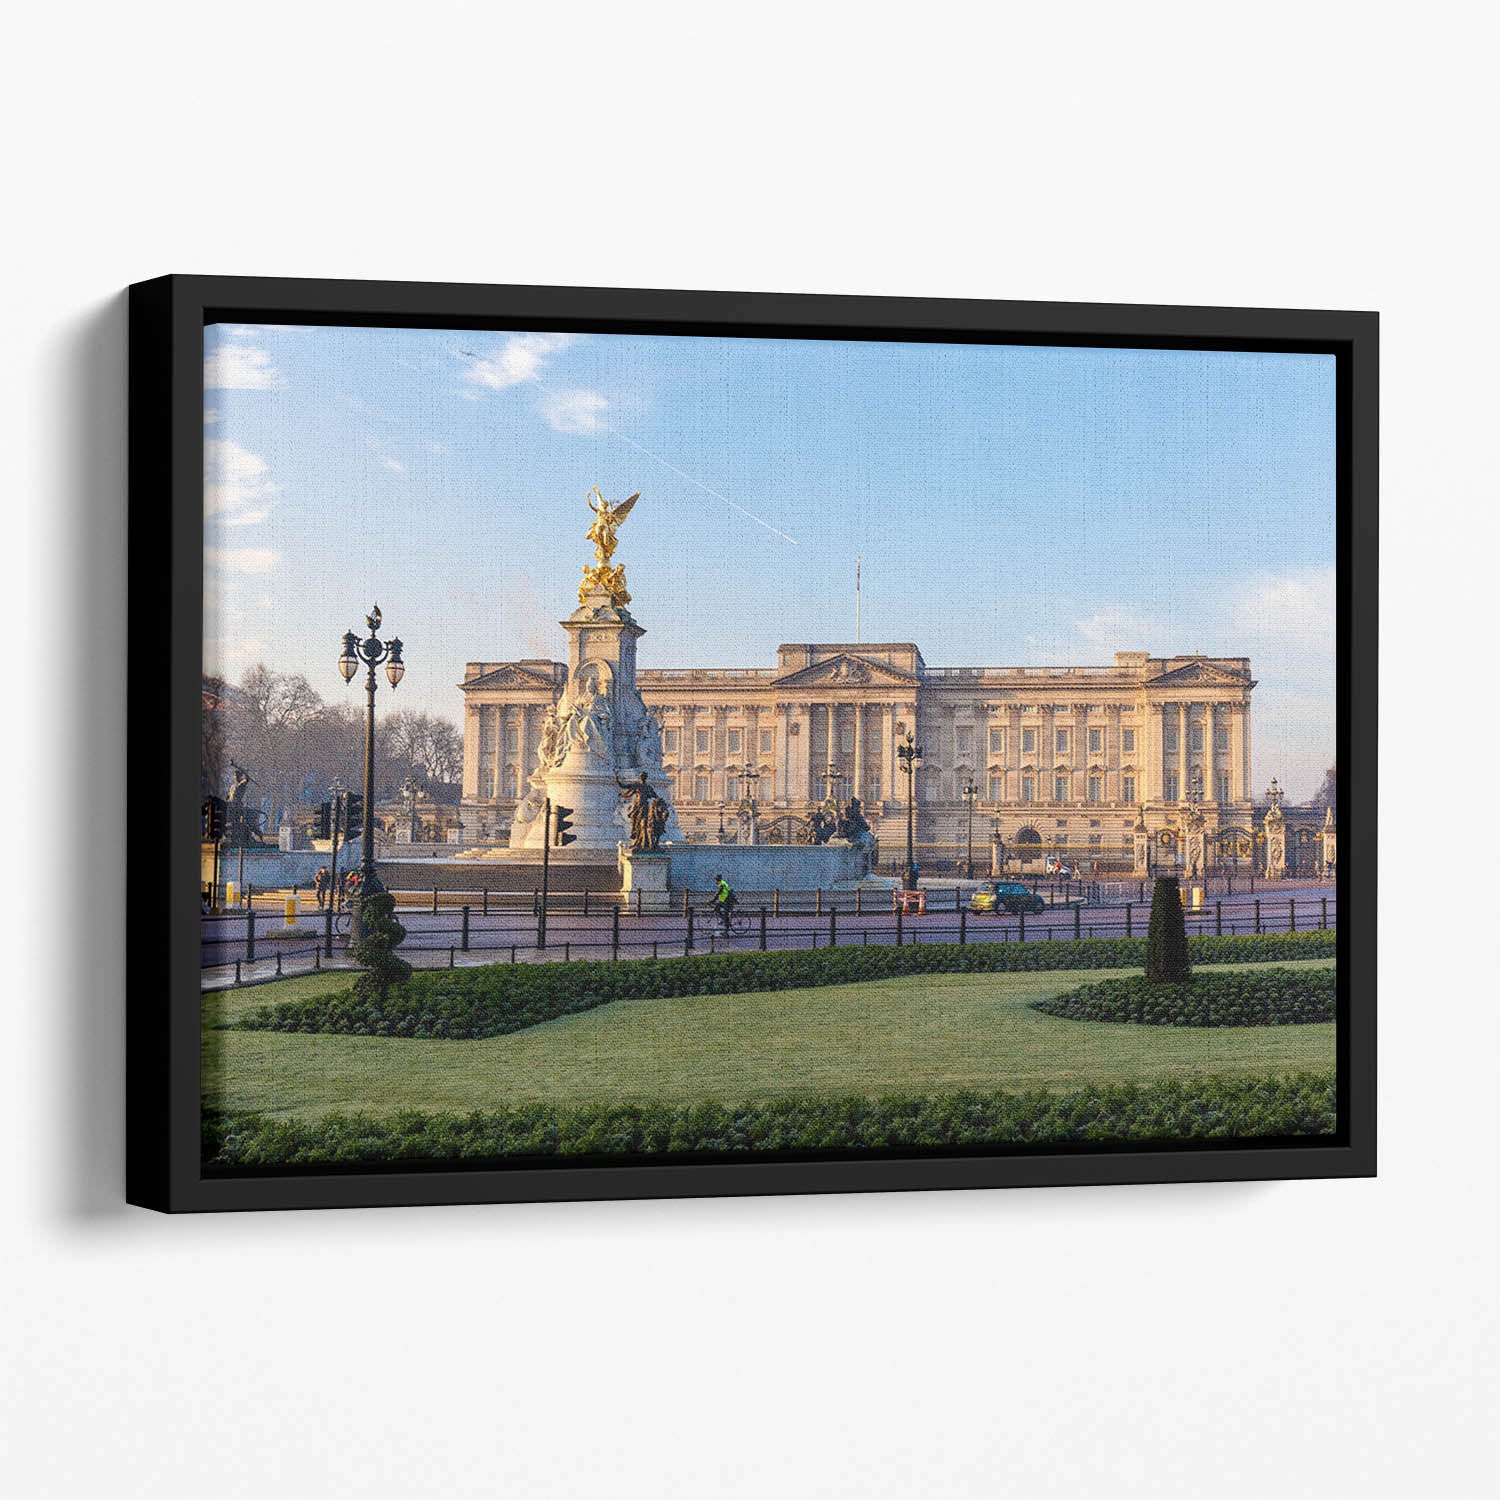 Buckingham palace in early winter morning Floating Framed Canvas